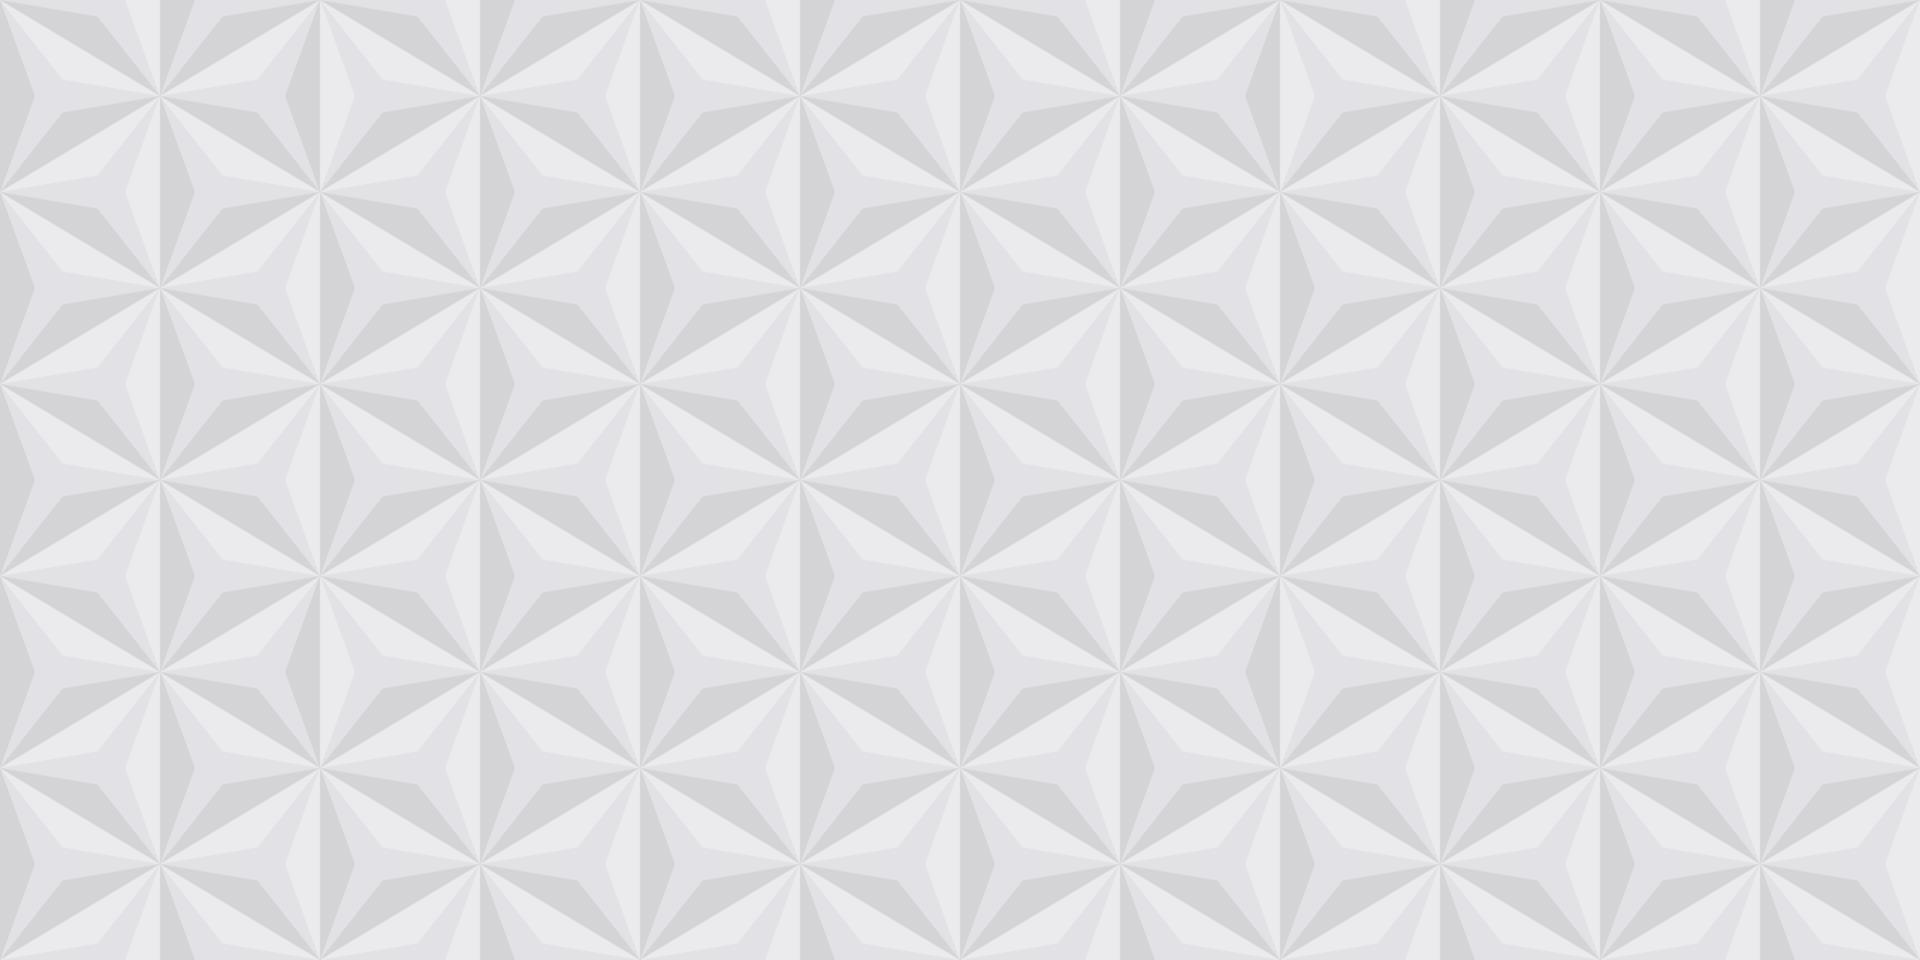 Triangle Geometric White 3D Background. Polygon Shape Pattern Backdrop. Grey Mosaic Geometry Pattern. Triangular Creative Template. Abstract Modern Wallpaper Design. Vector Illustration.